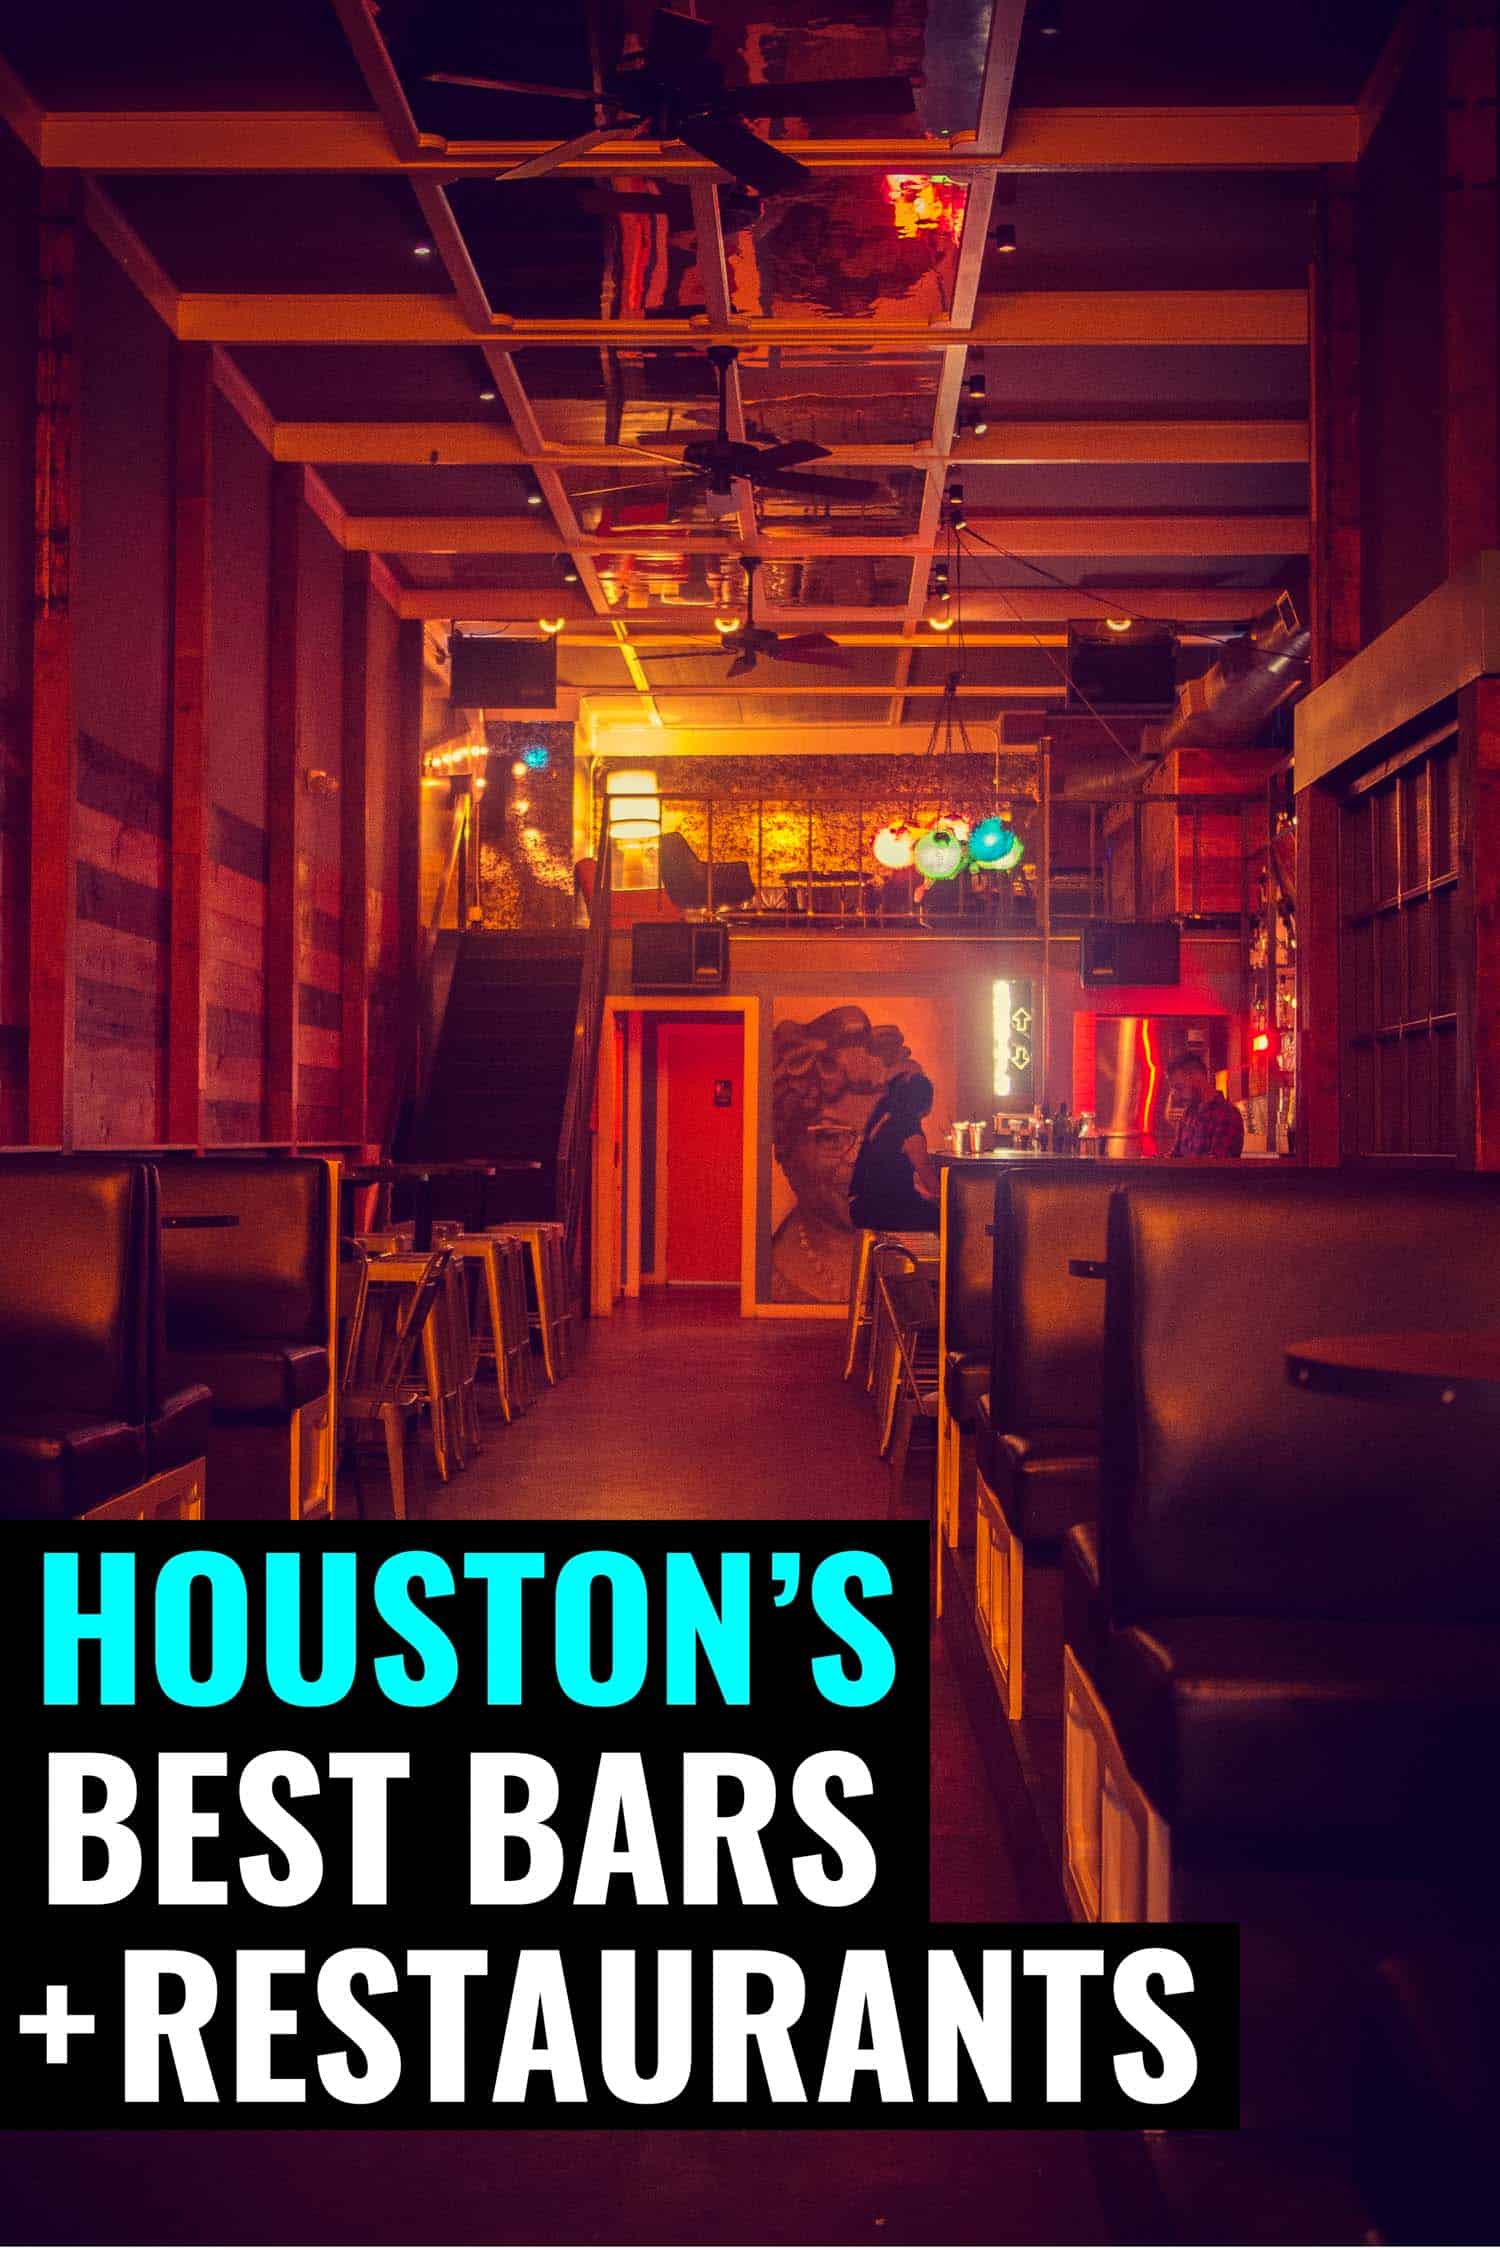 Interior of one of the most popular bars in Houston.